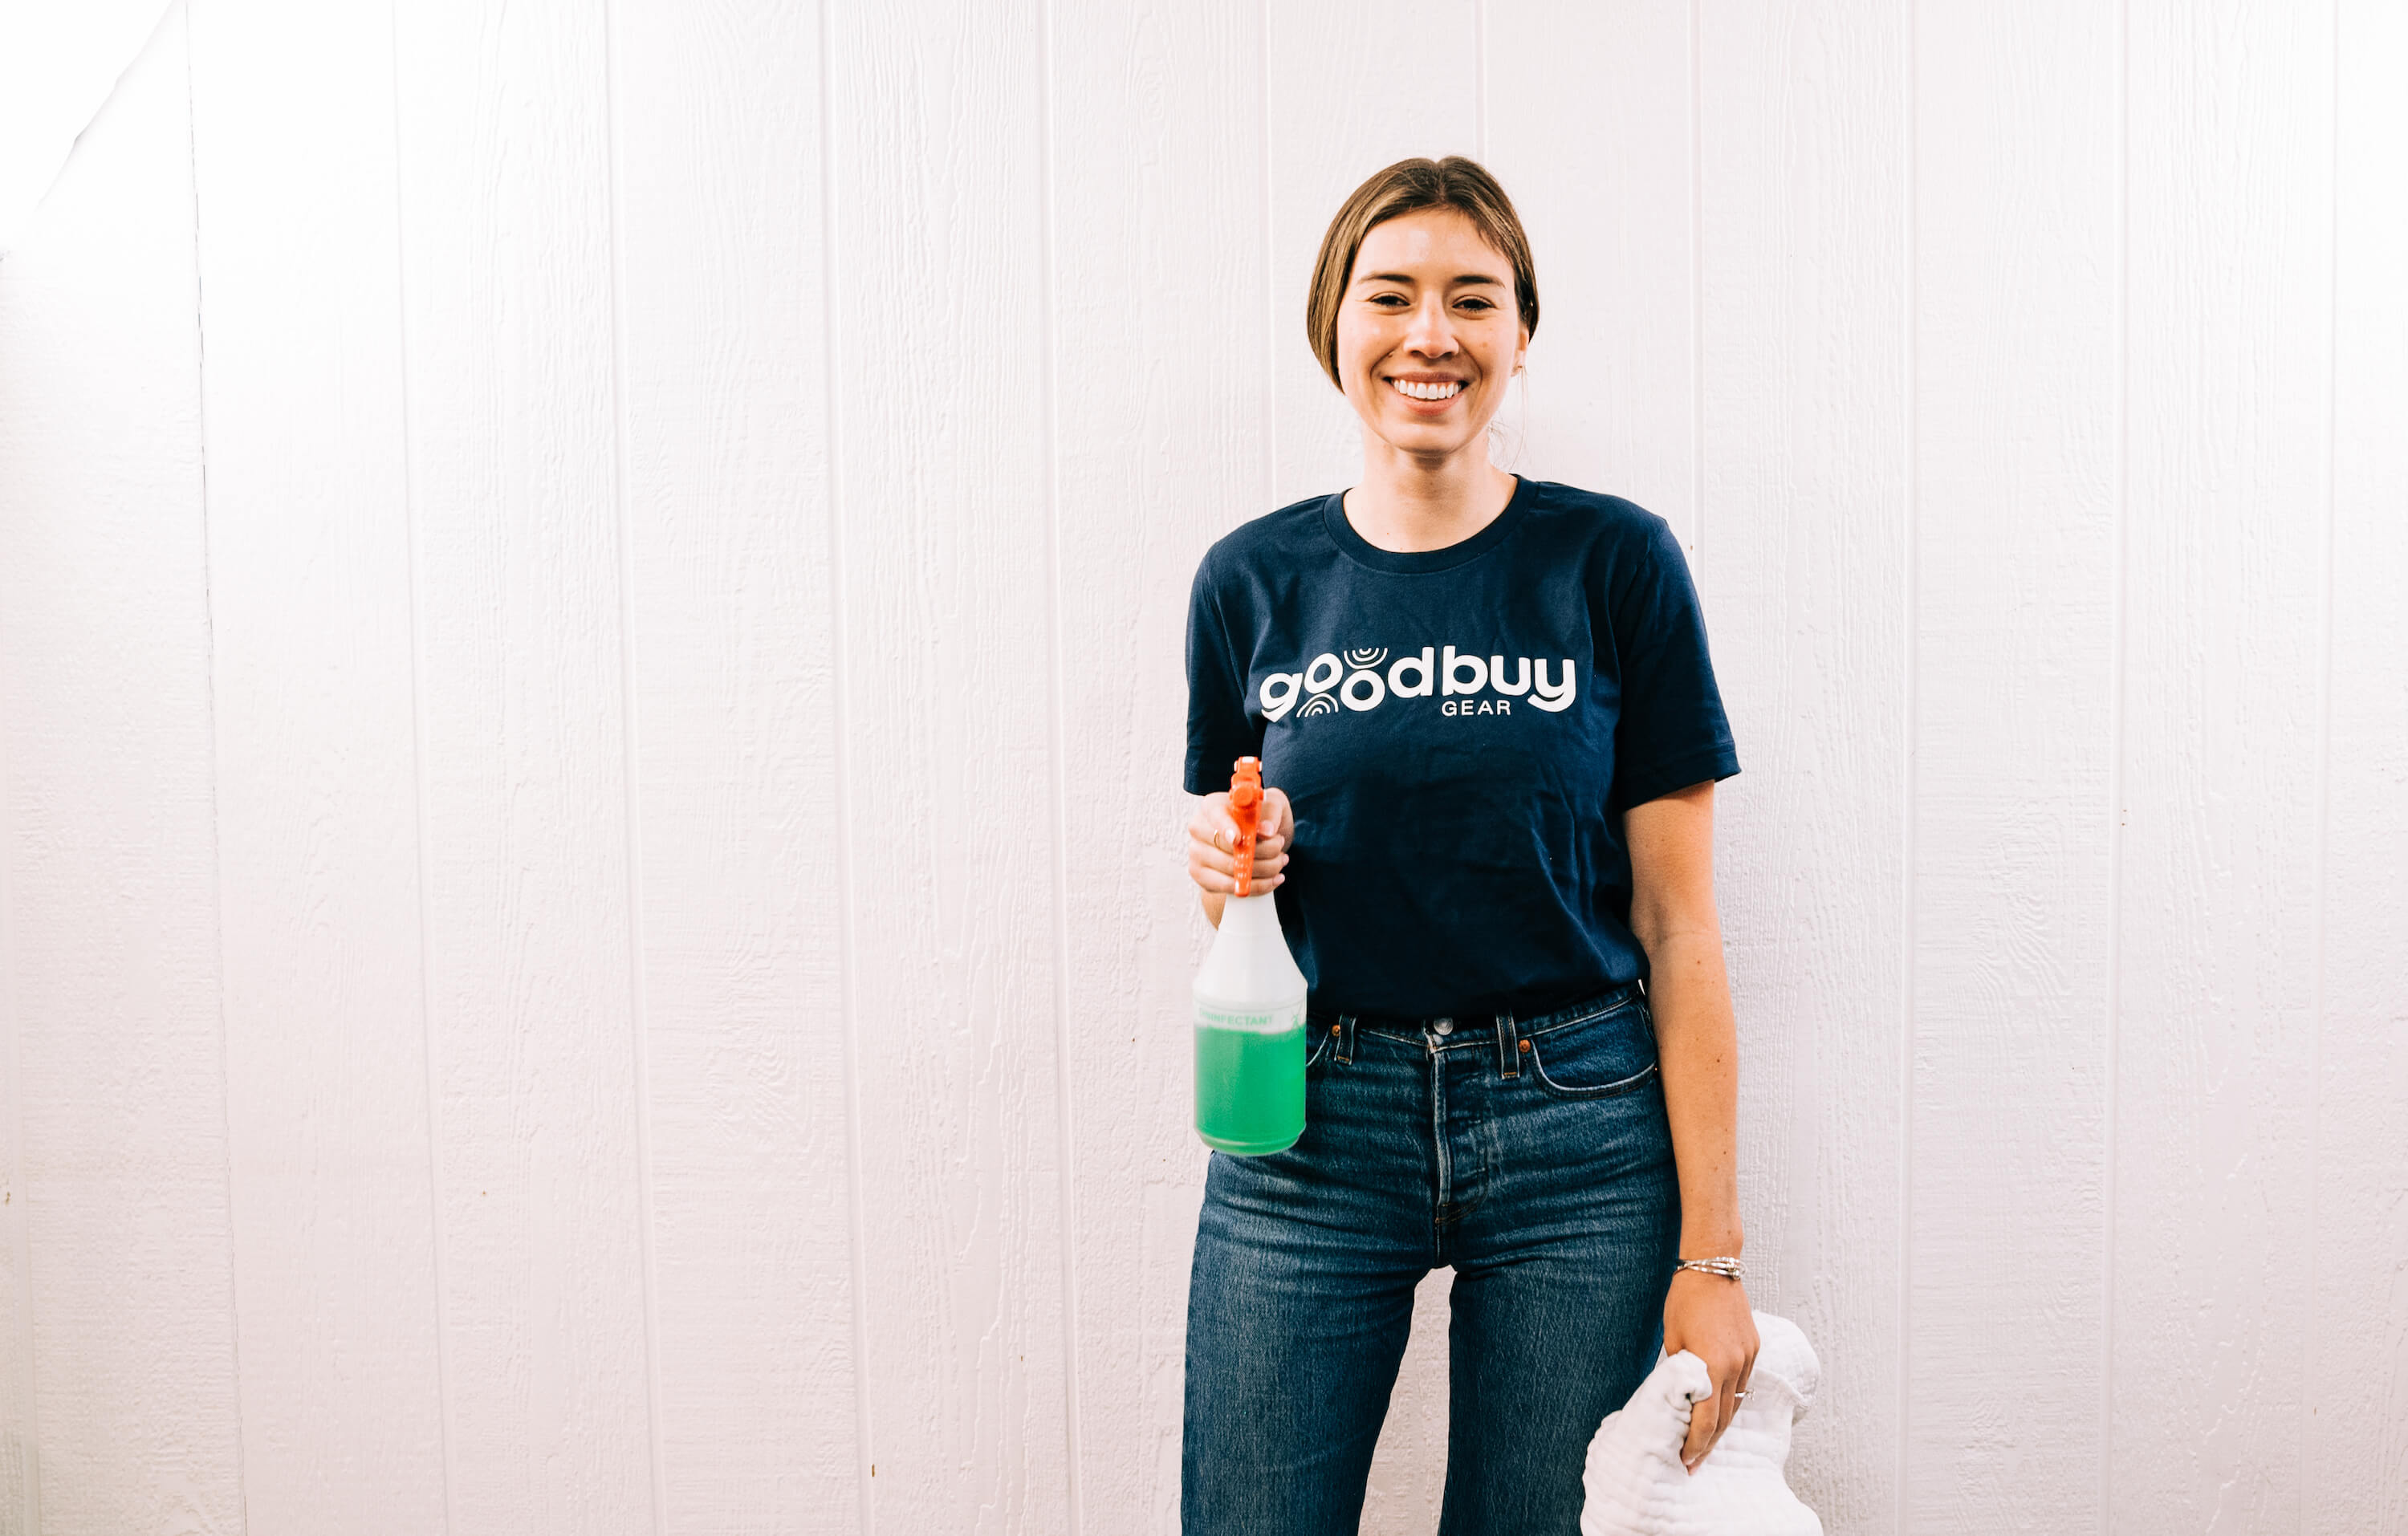 GoodBuy Gear's gear expert smiling and holding a bottle of cleaning solution 